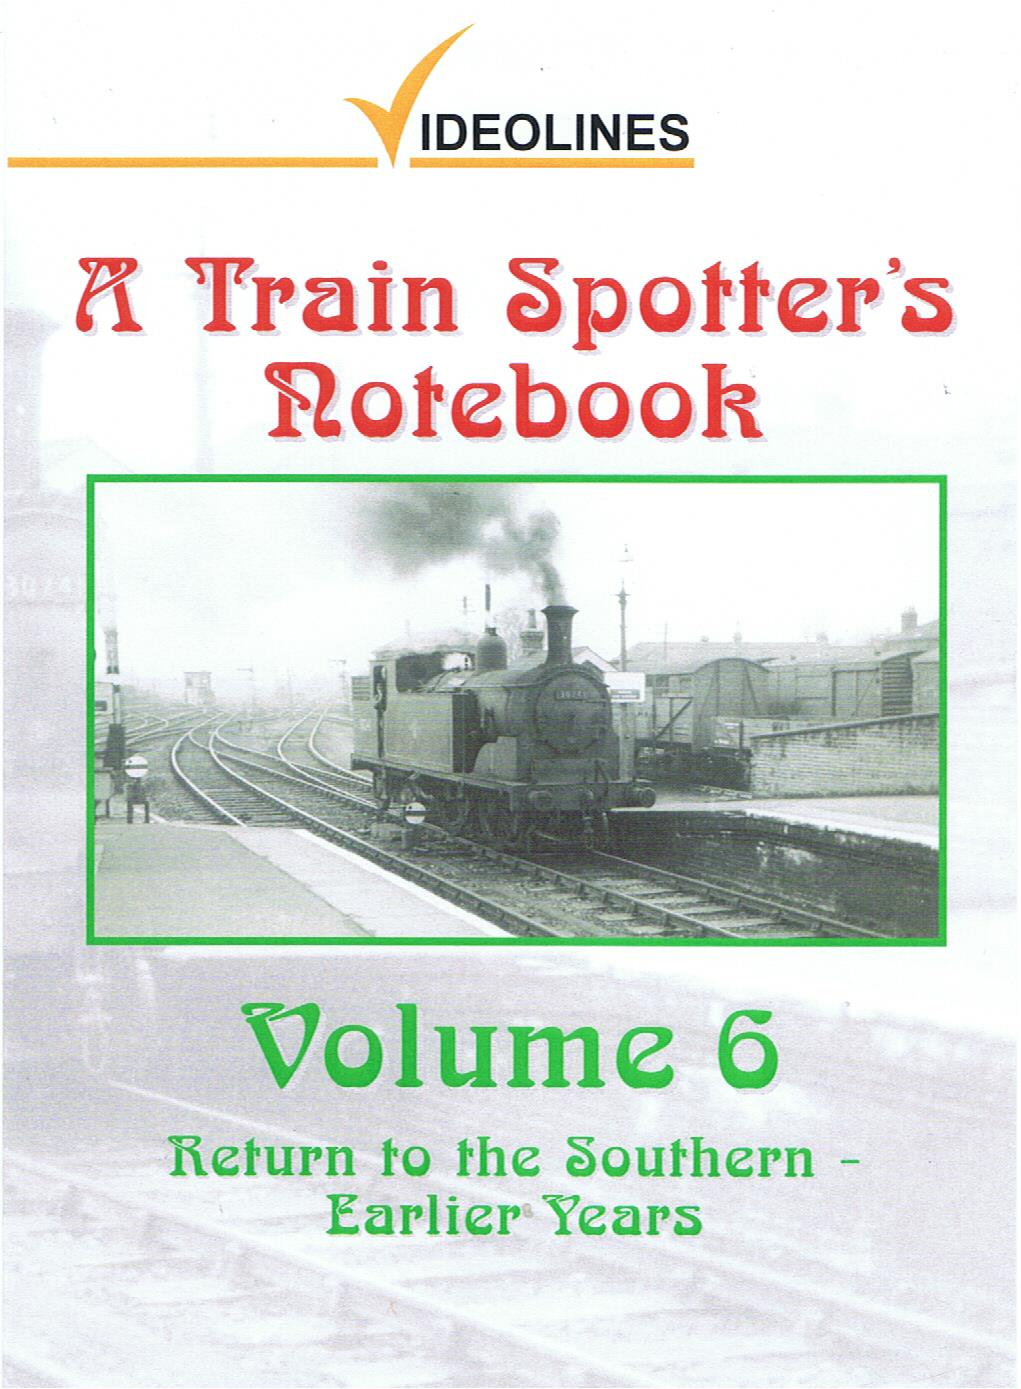 A Train Spotters Notebook Vol. 6: Return to the Southern - Earlier Years